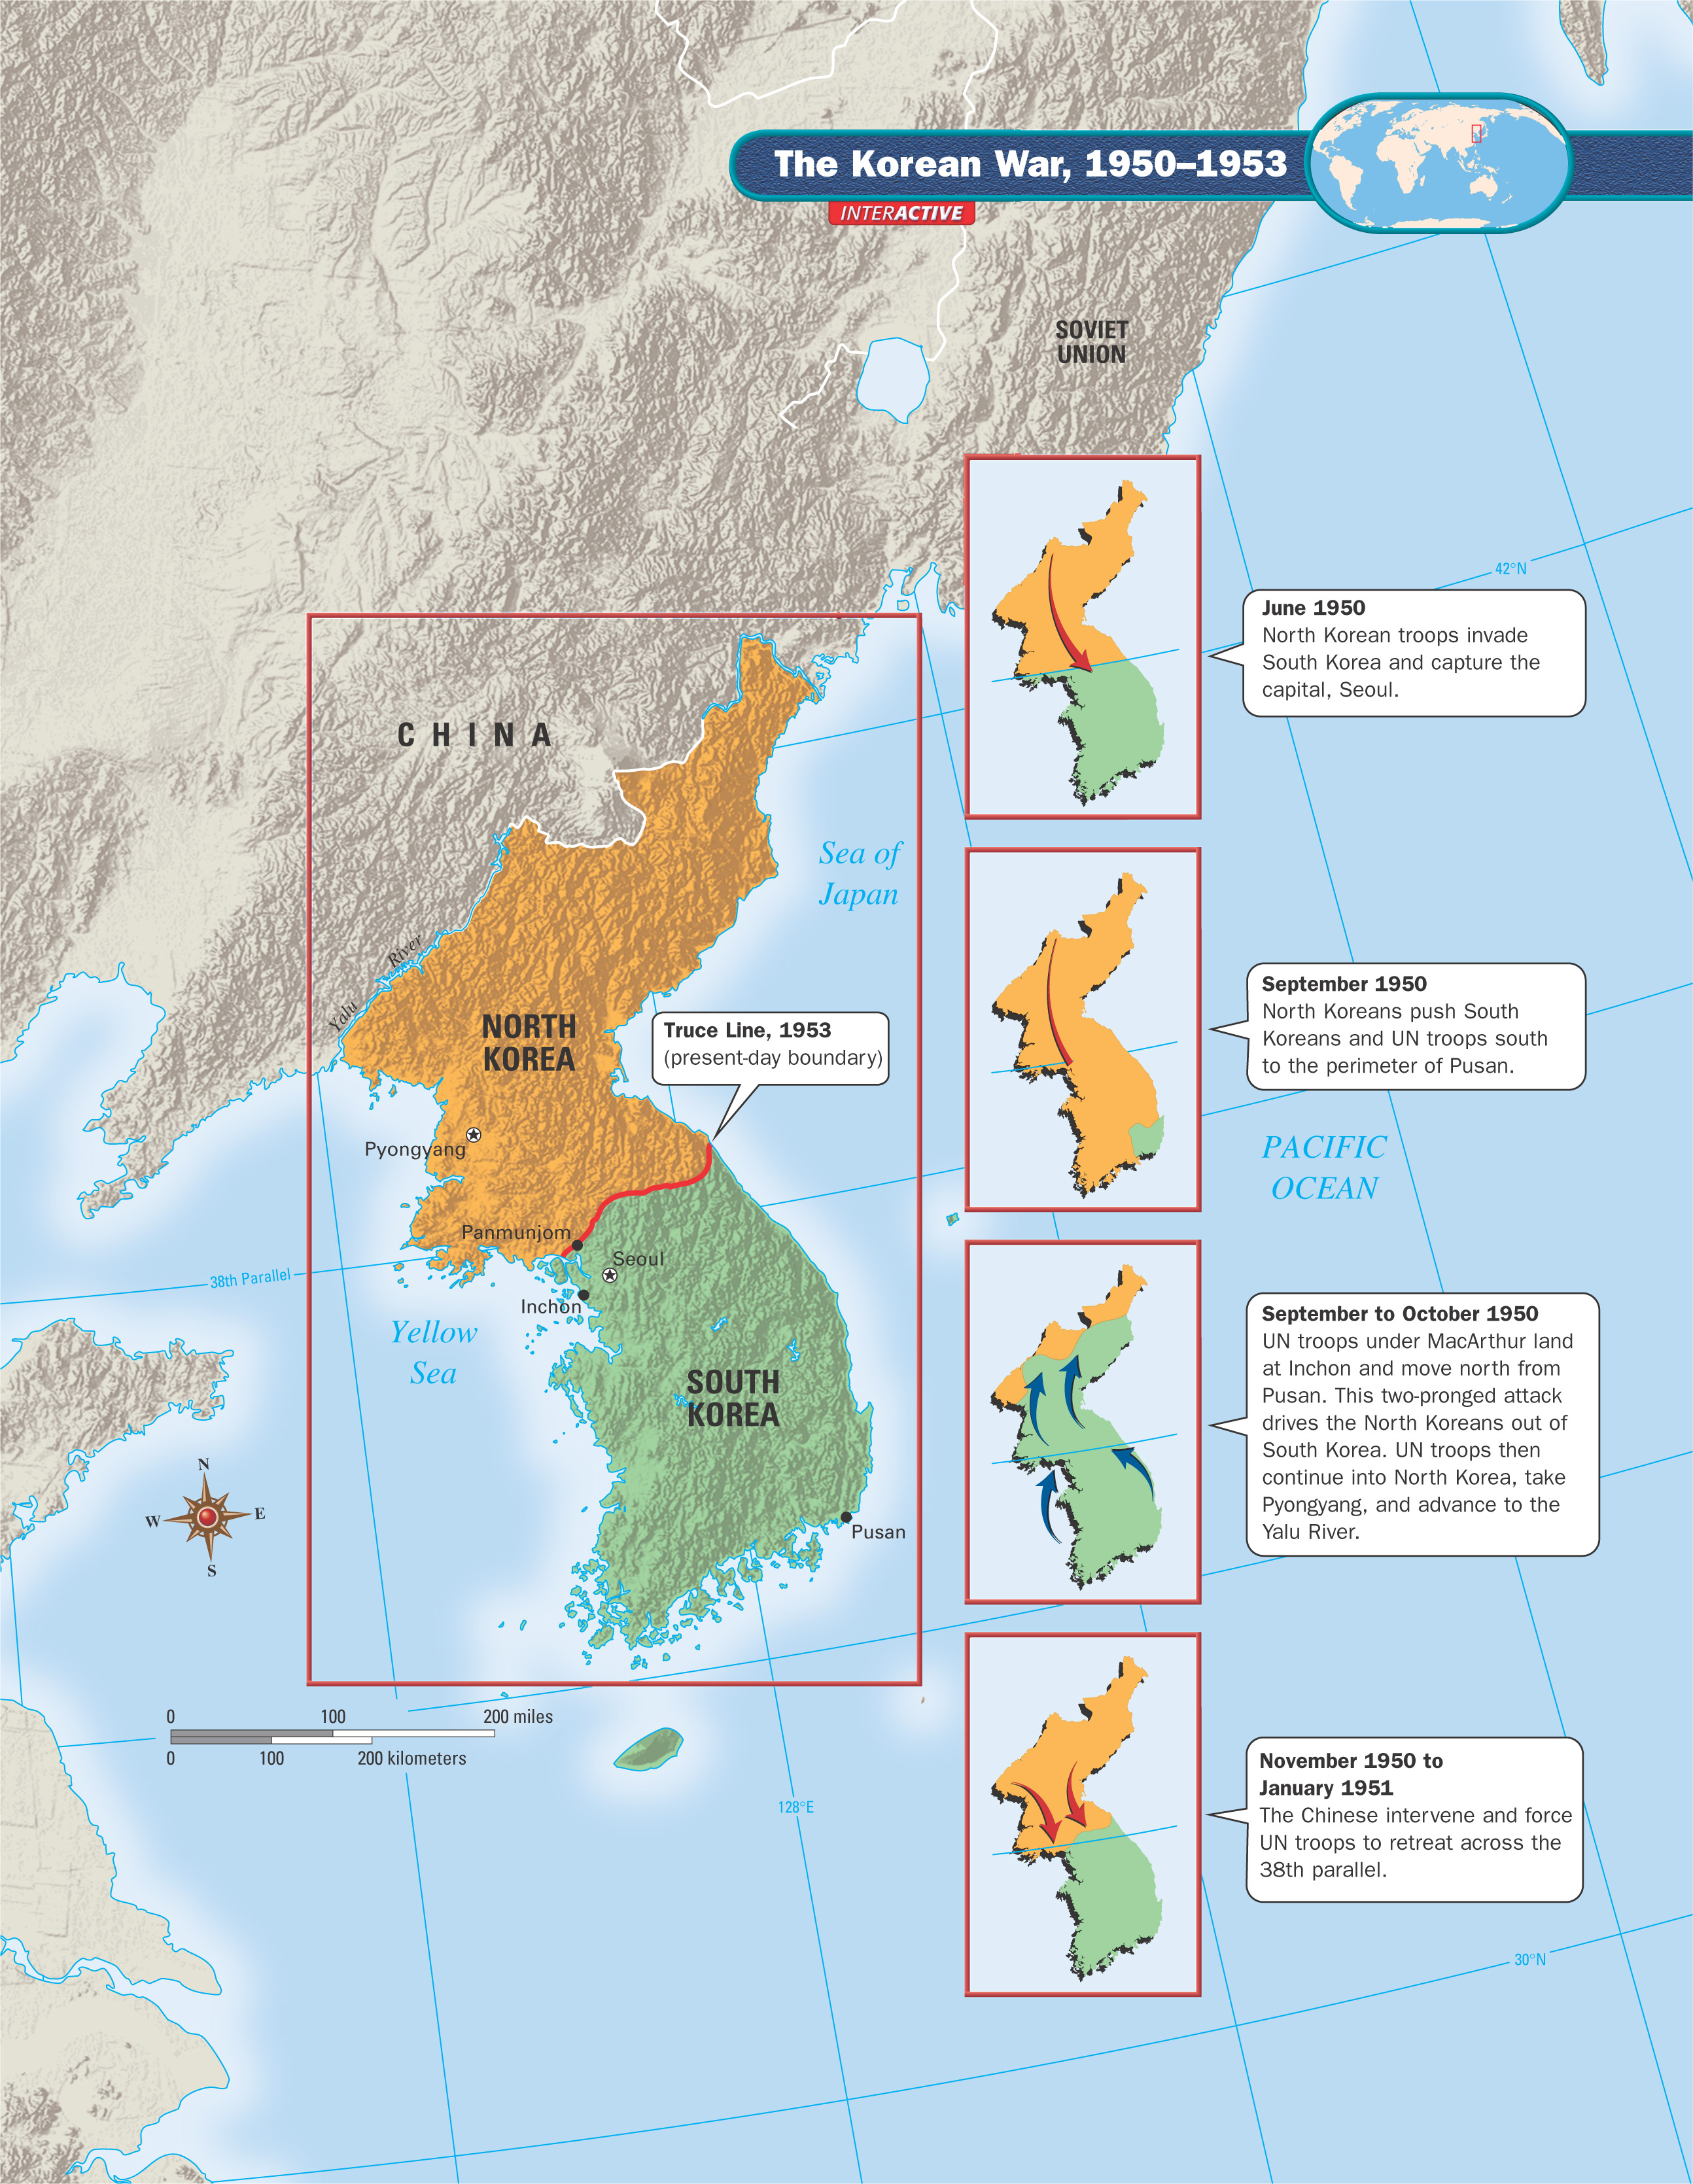 Map: The Korean War 1950 - 1953, with four insets shows troop movements between North and South Korea.  Main map shows the 1953 Truce Line, the present-day boundary, dividing the long land mass into North and South Korea.